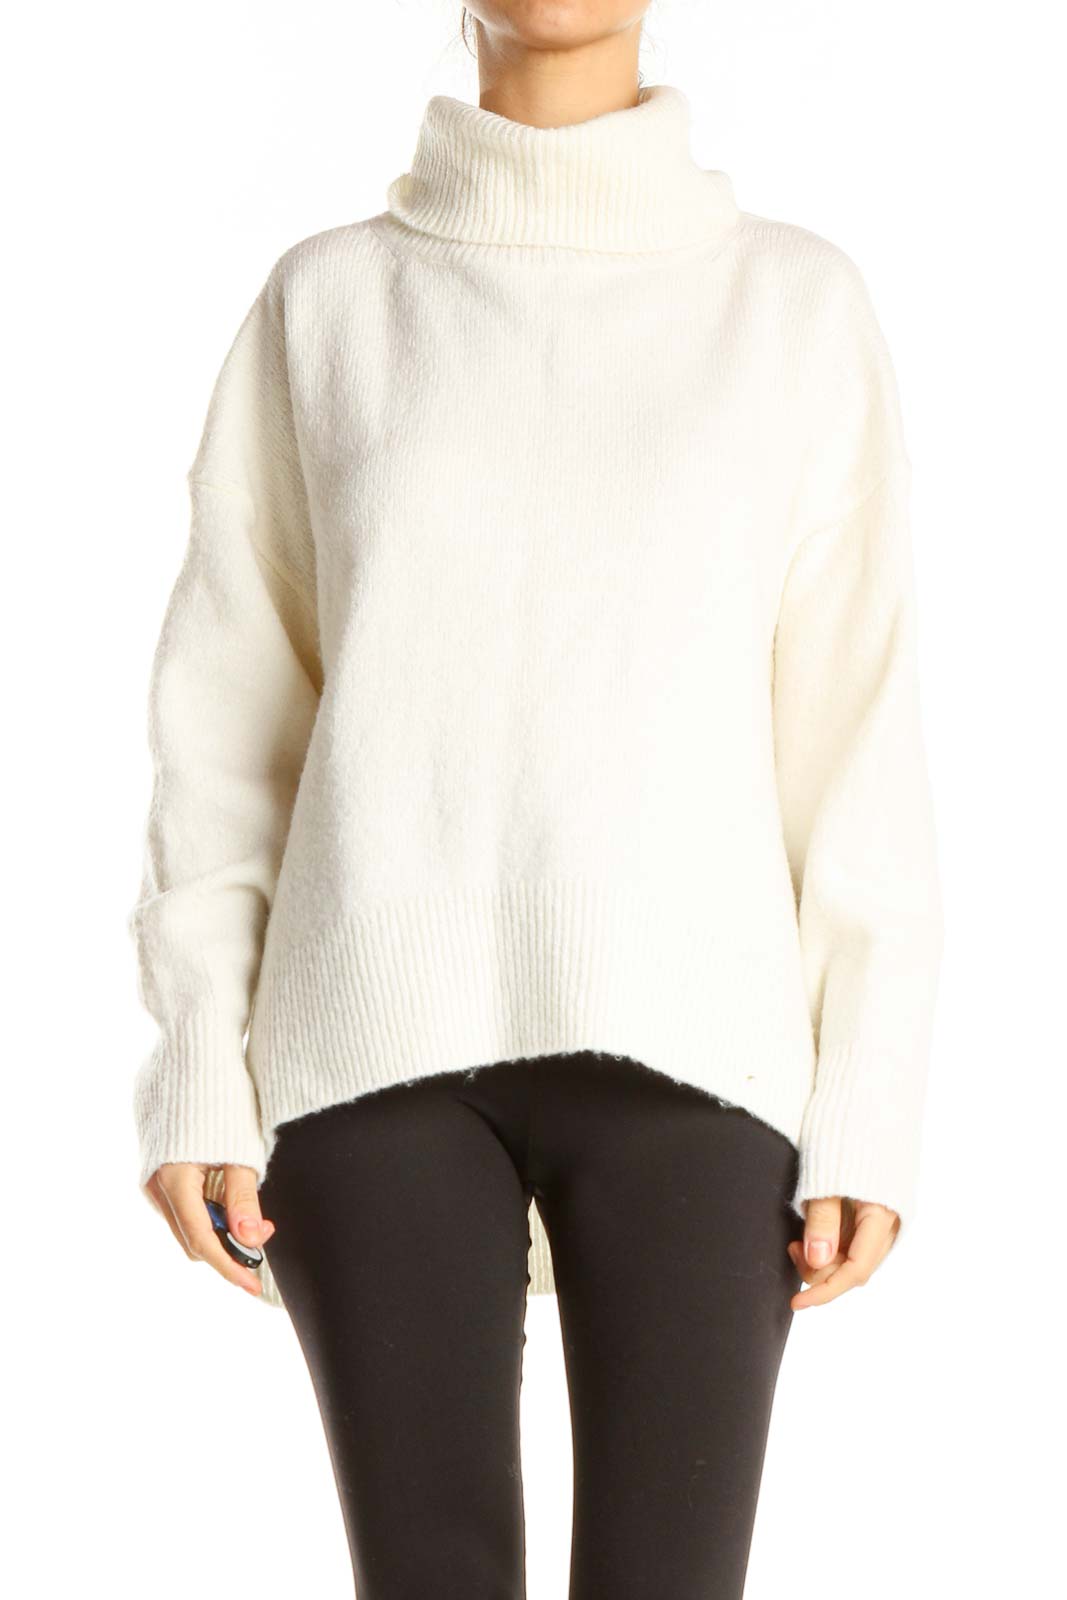 White Turtleneck Chic Sweater Front